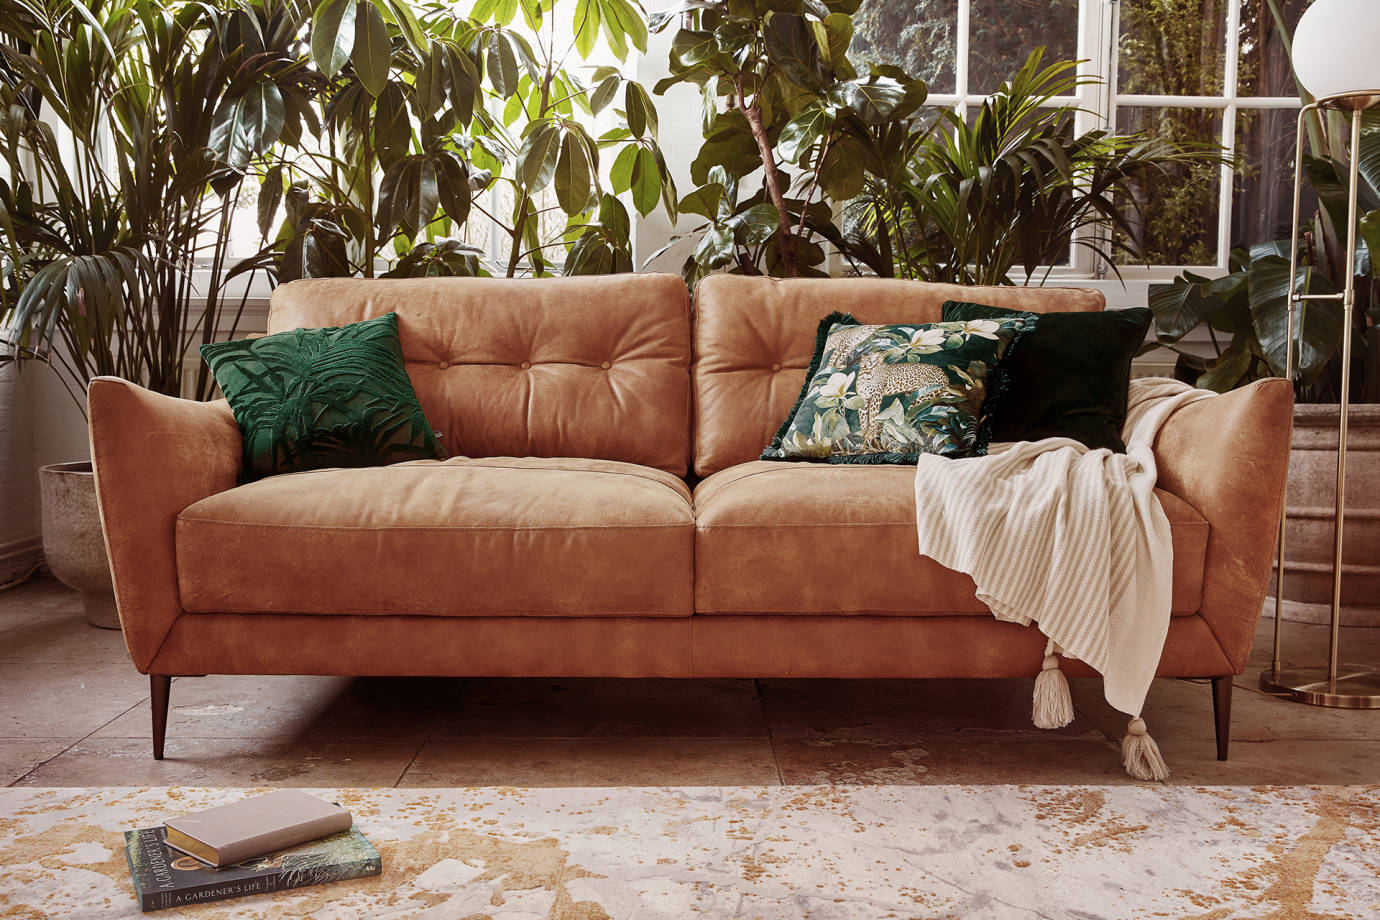 Leather Sofas Sofology, Light Tan Leather Couch Set